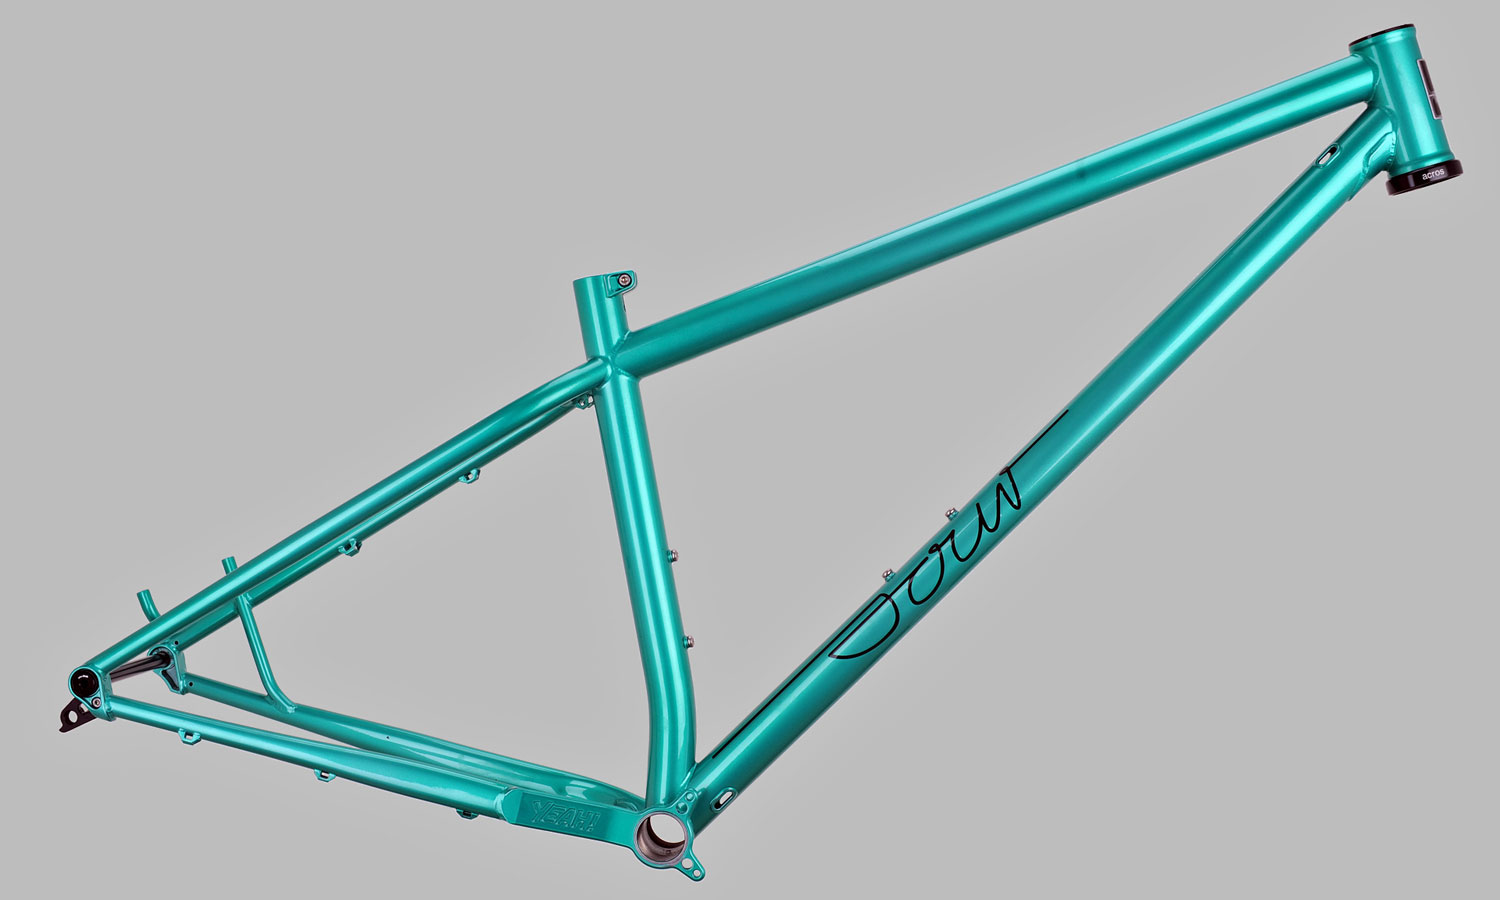 2021 Sour Bikes affordable steel frame updates Crumble